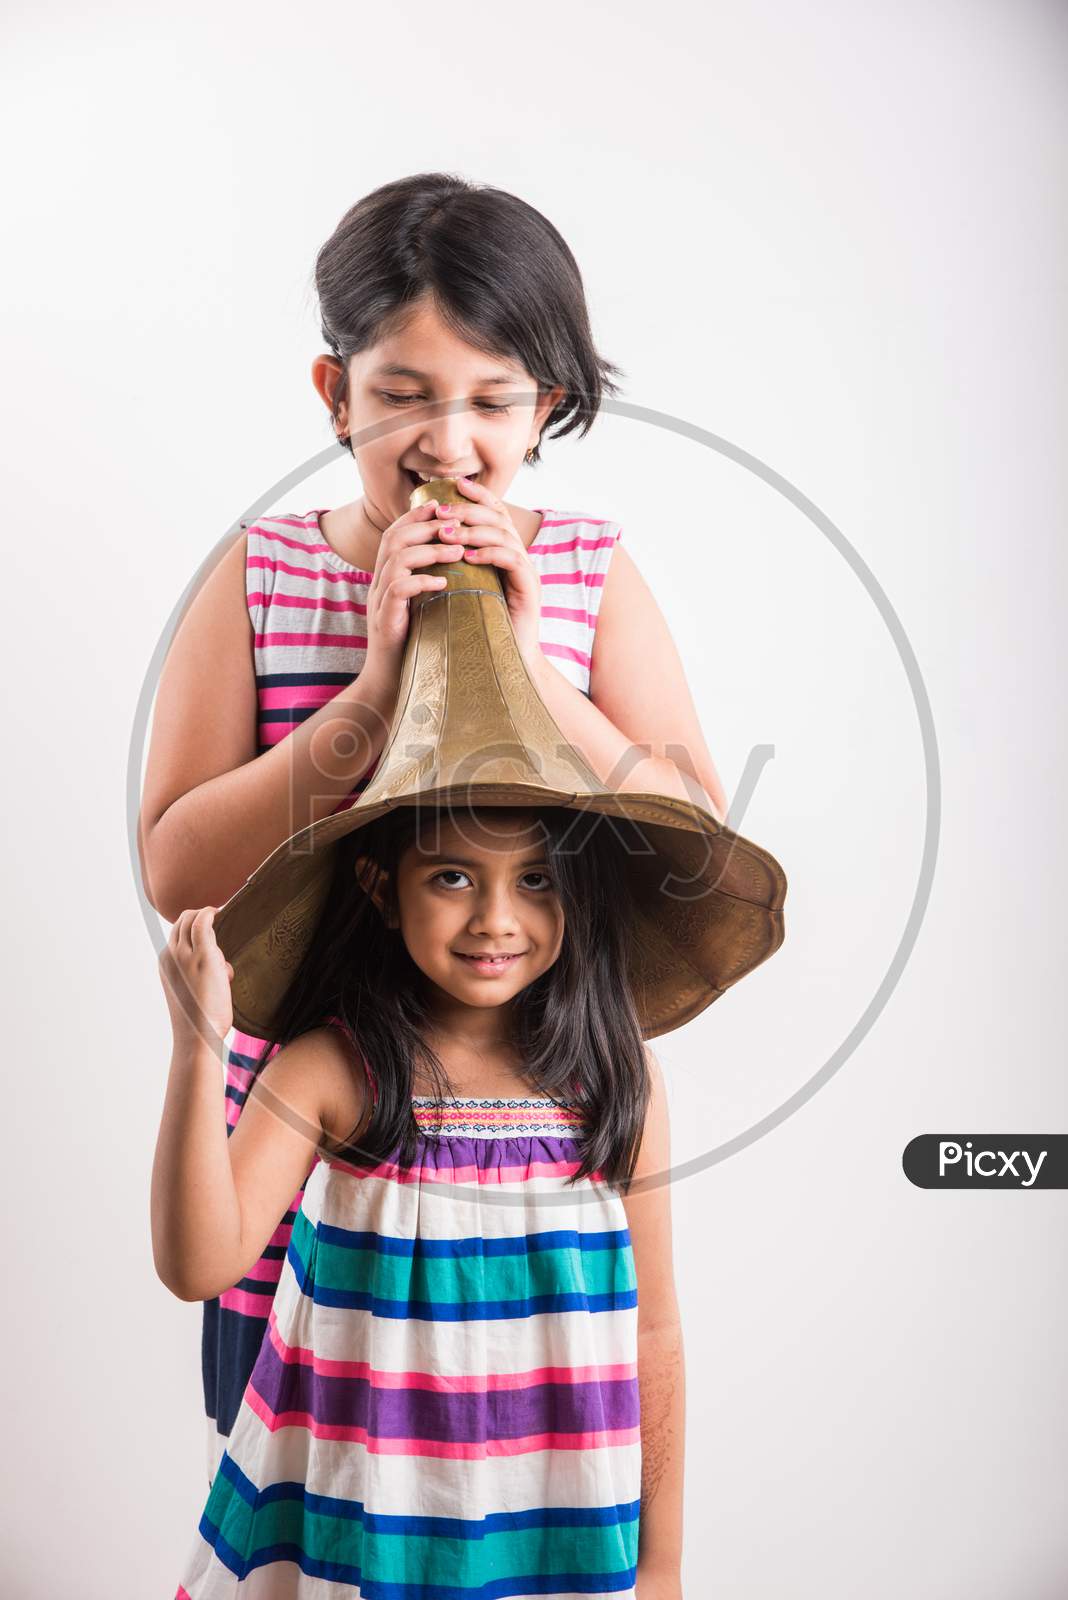 Image of small indian girls shouting / yelling in an vintage brass  gramophone speaker, isolated over white background-UU445806-Picxy